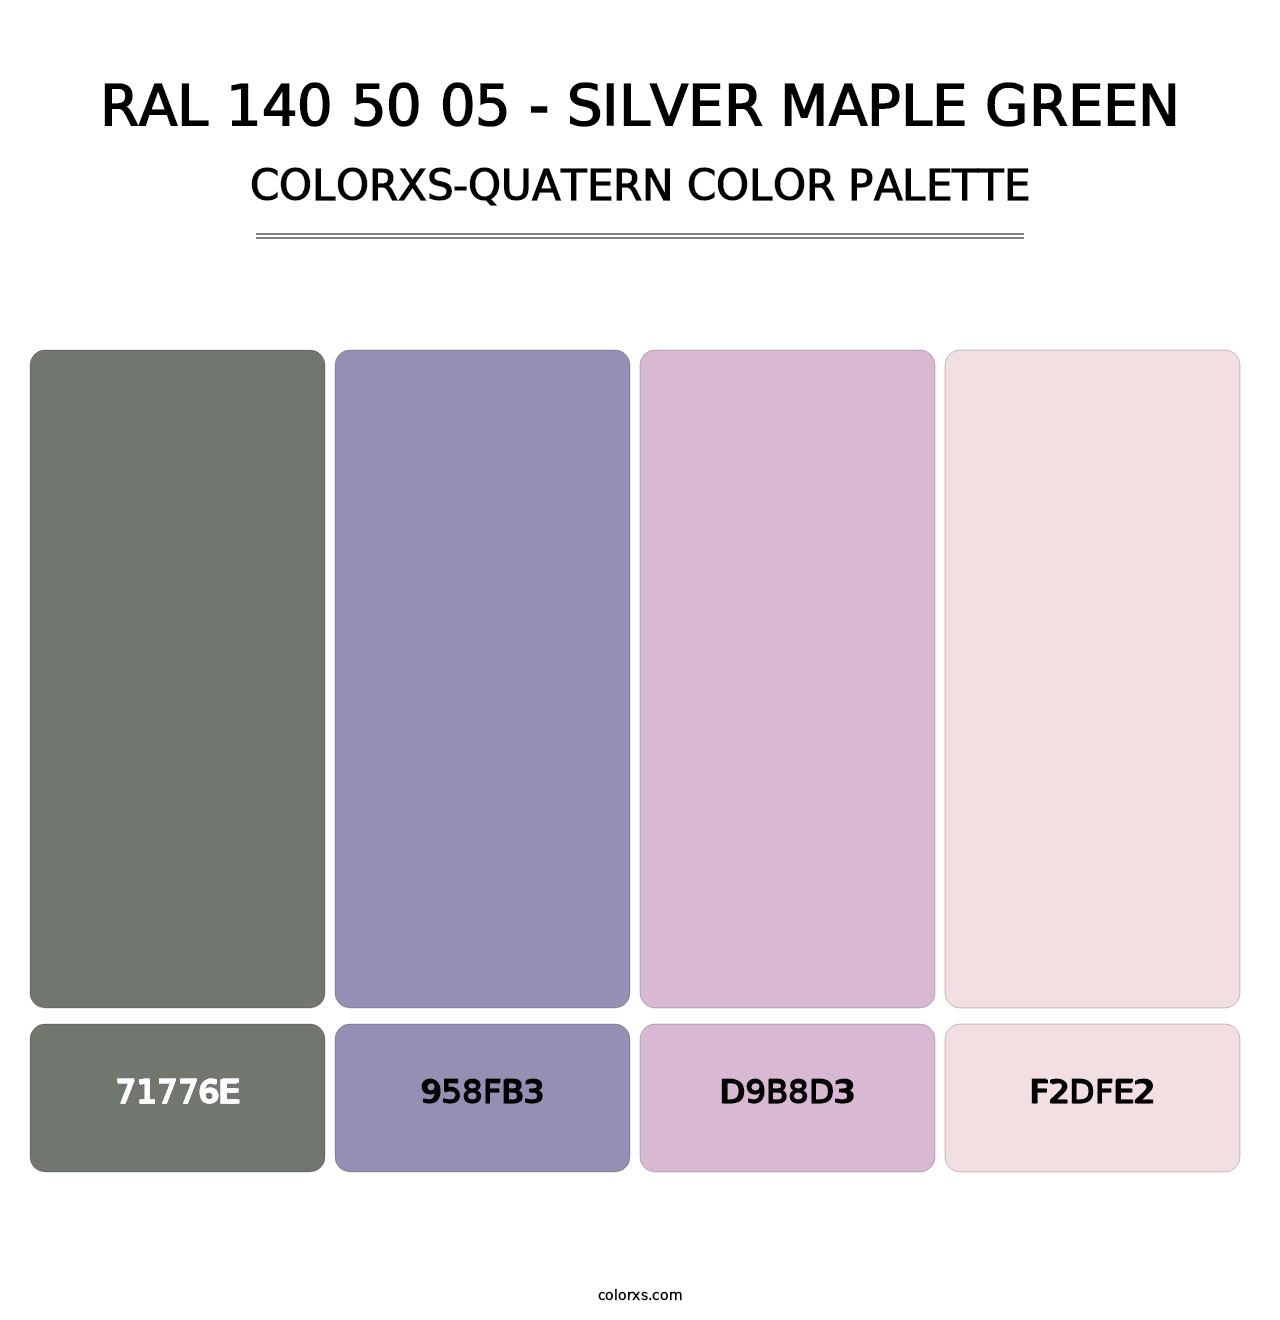 RAL 140 50 05 - Silver Maple Green - Colorxs Quatern Palette